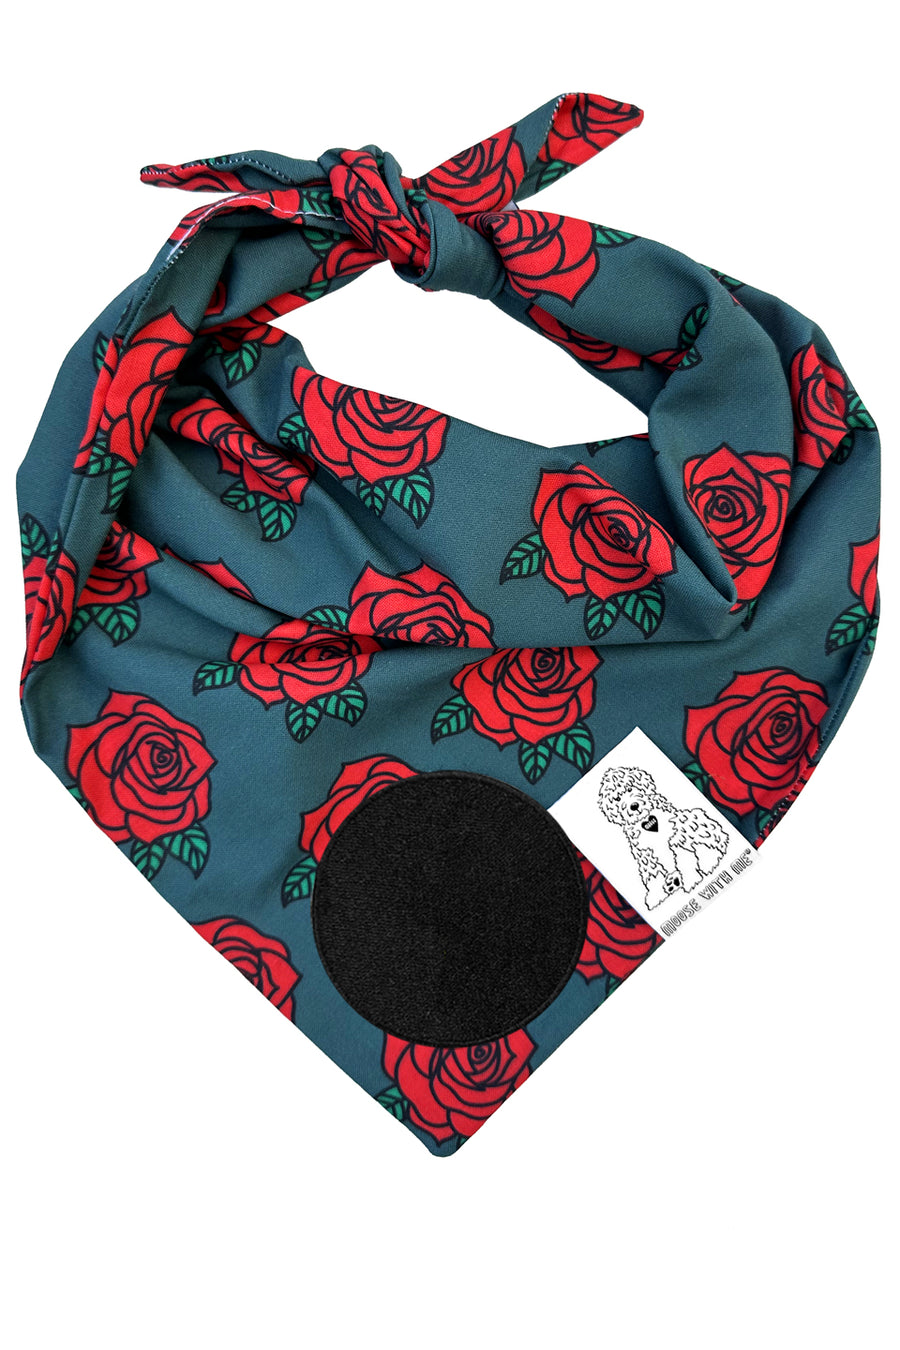 Dog Bandana Roses- Customize with Interchangeable Velcro Patches